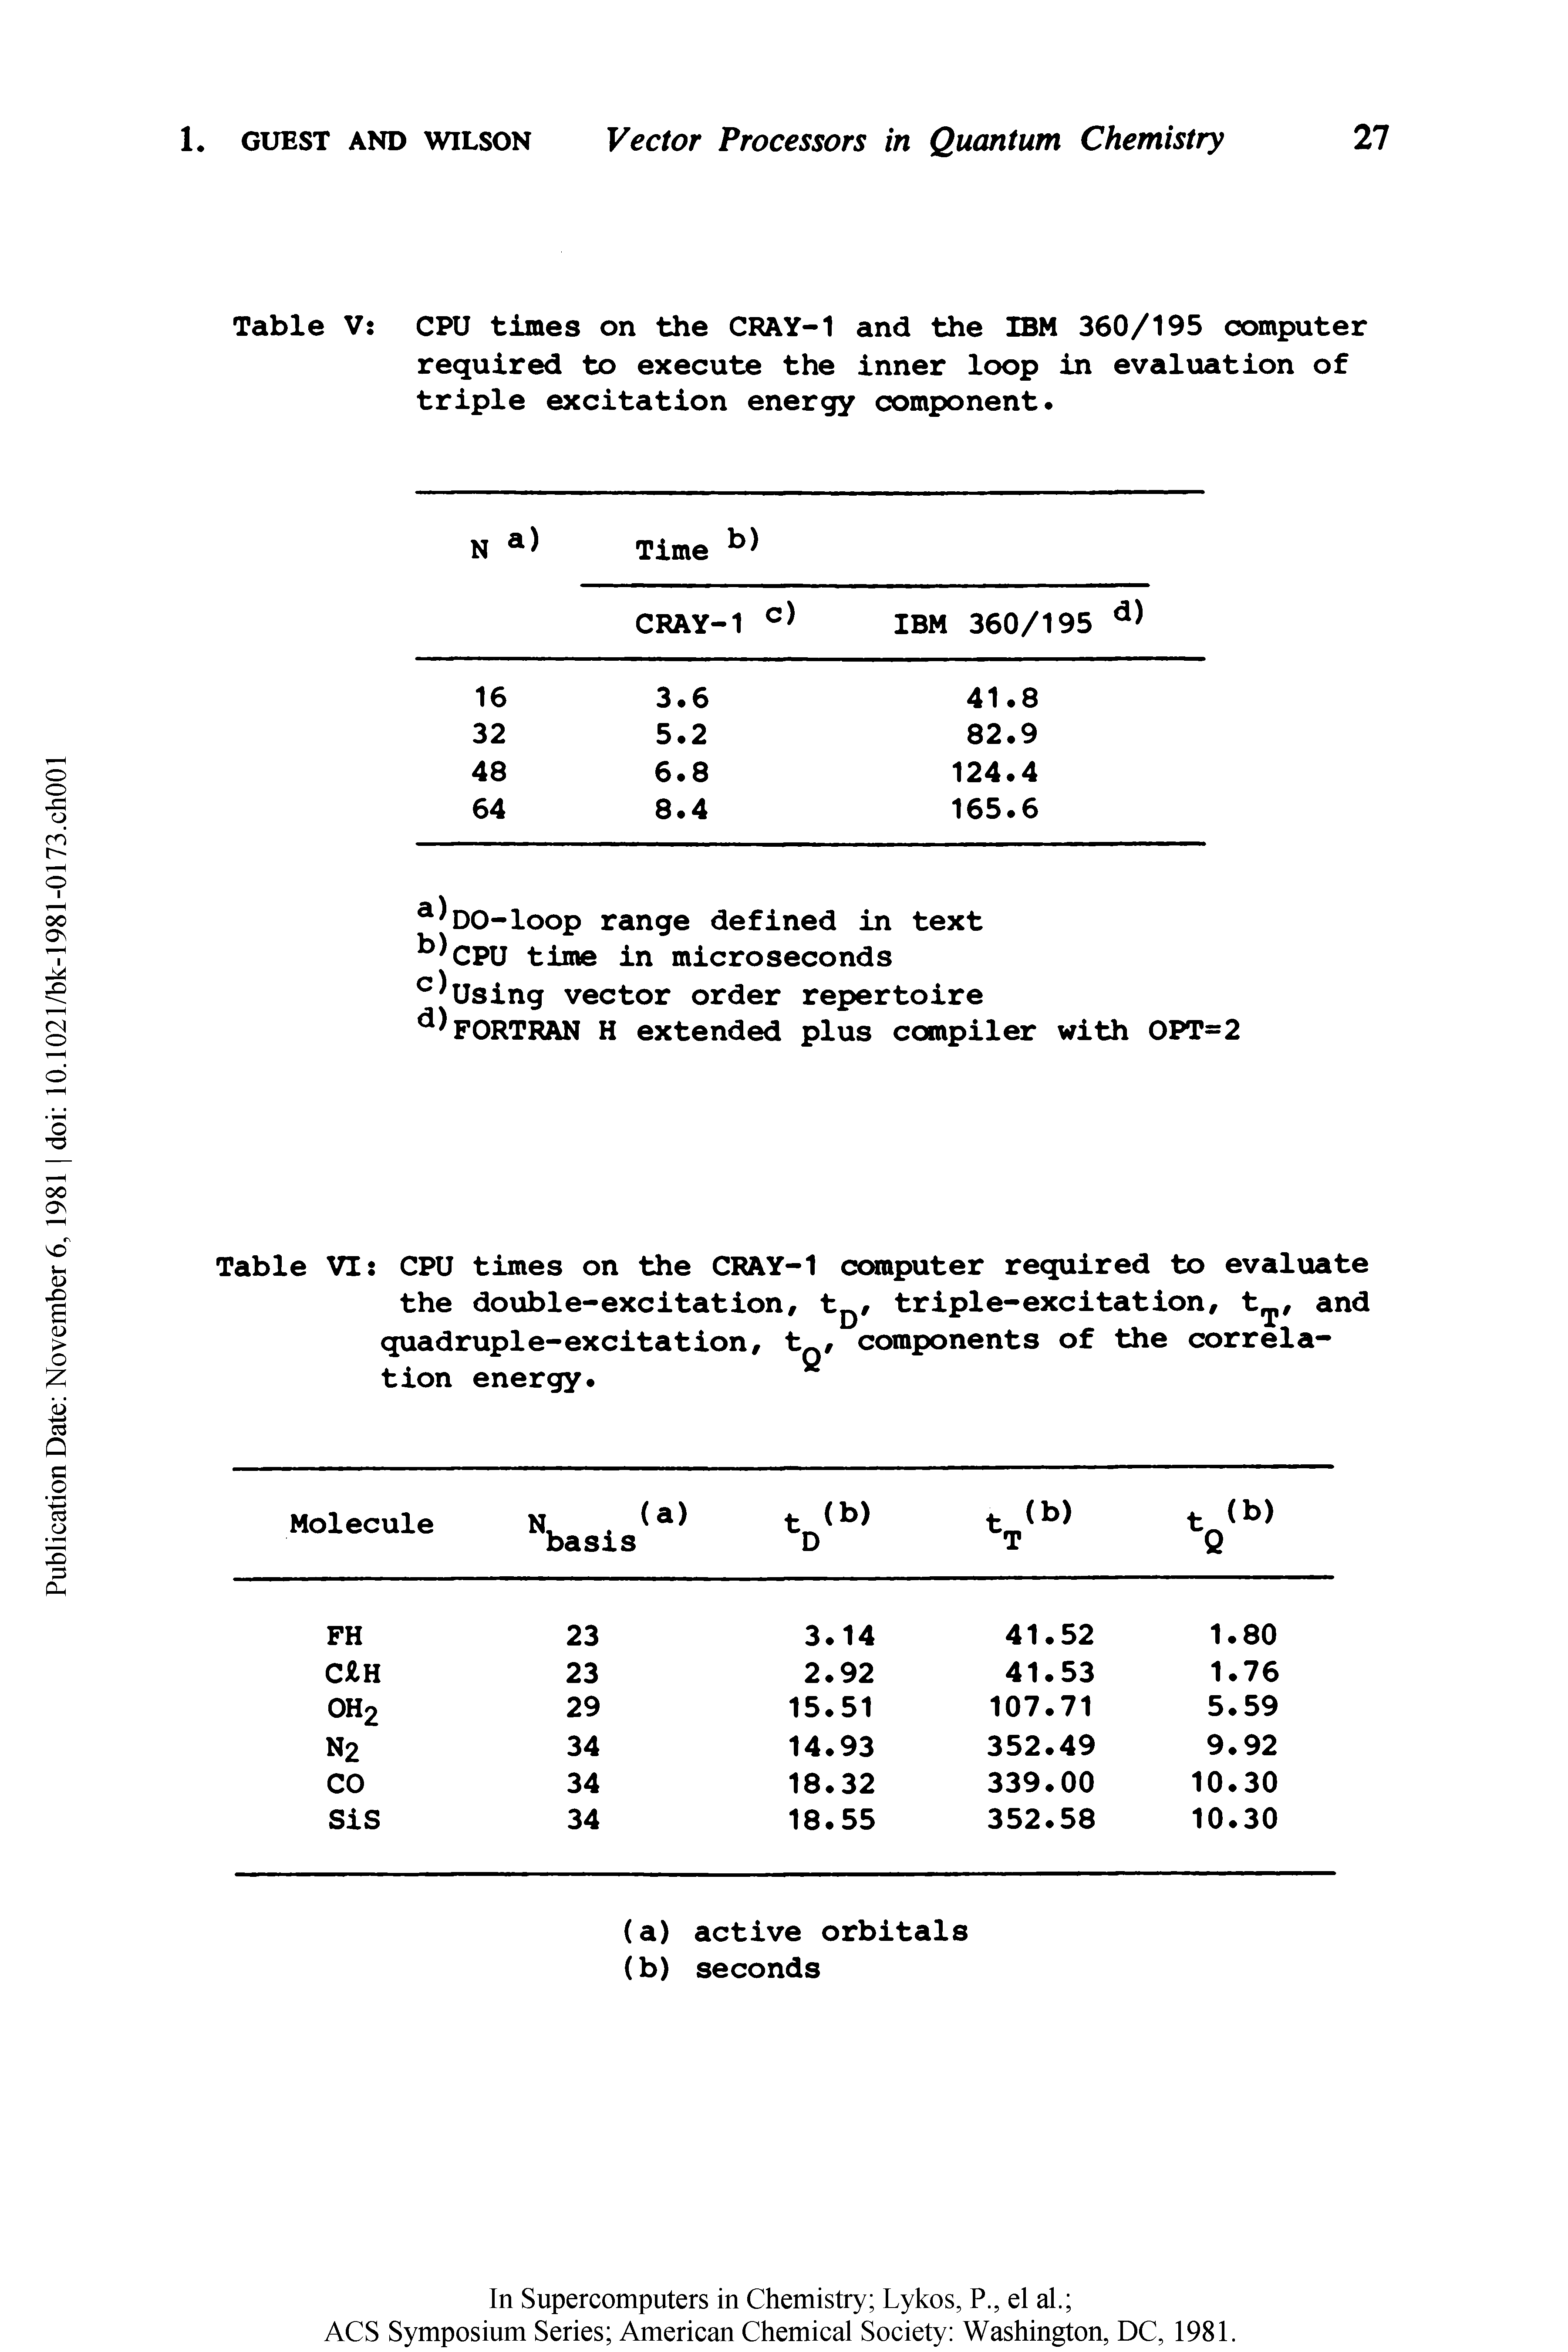 Table VI CPU times on the CRAY-1 computer required to evaluate the double-excitation/ tD/ triple-excitation/ and quadruple-excitation/ t / components of the correlation energy.